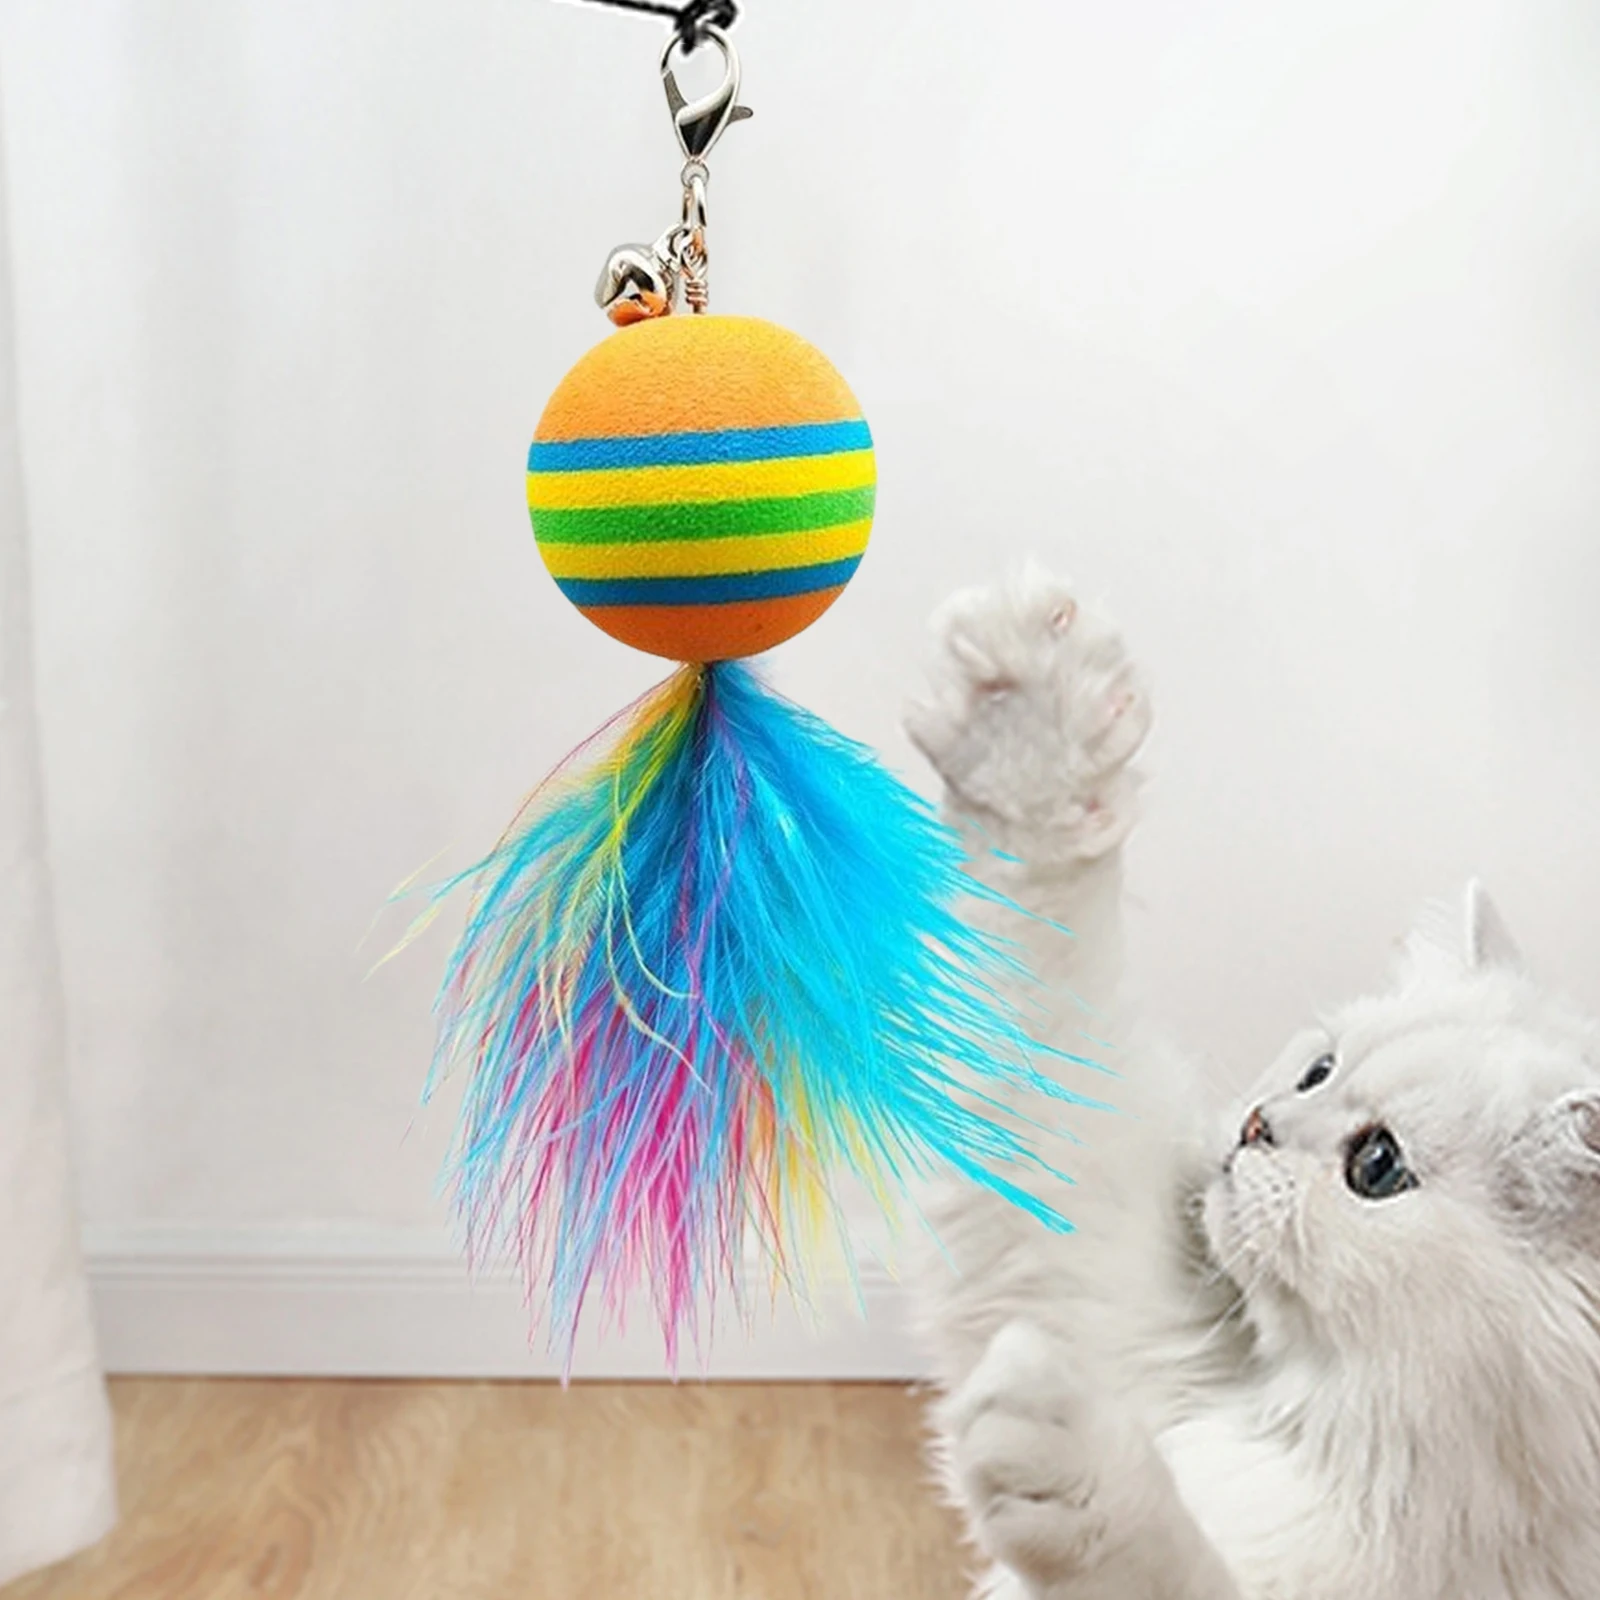 Simulation Bird interactive Cat Toy Funny Feather Cat Stick with Bell Cat Playing Teaser Wand Toy for Kitten Cat Supplies